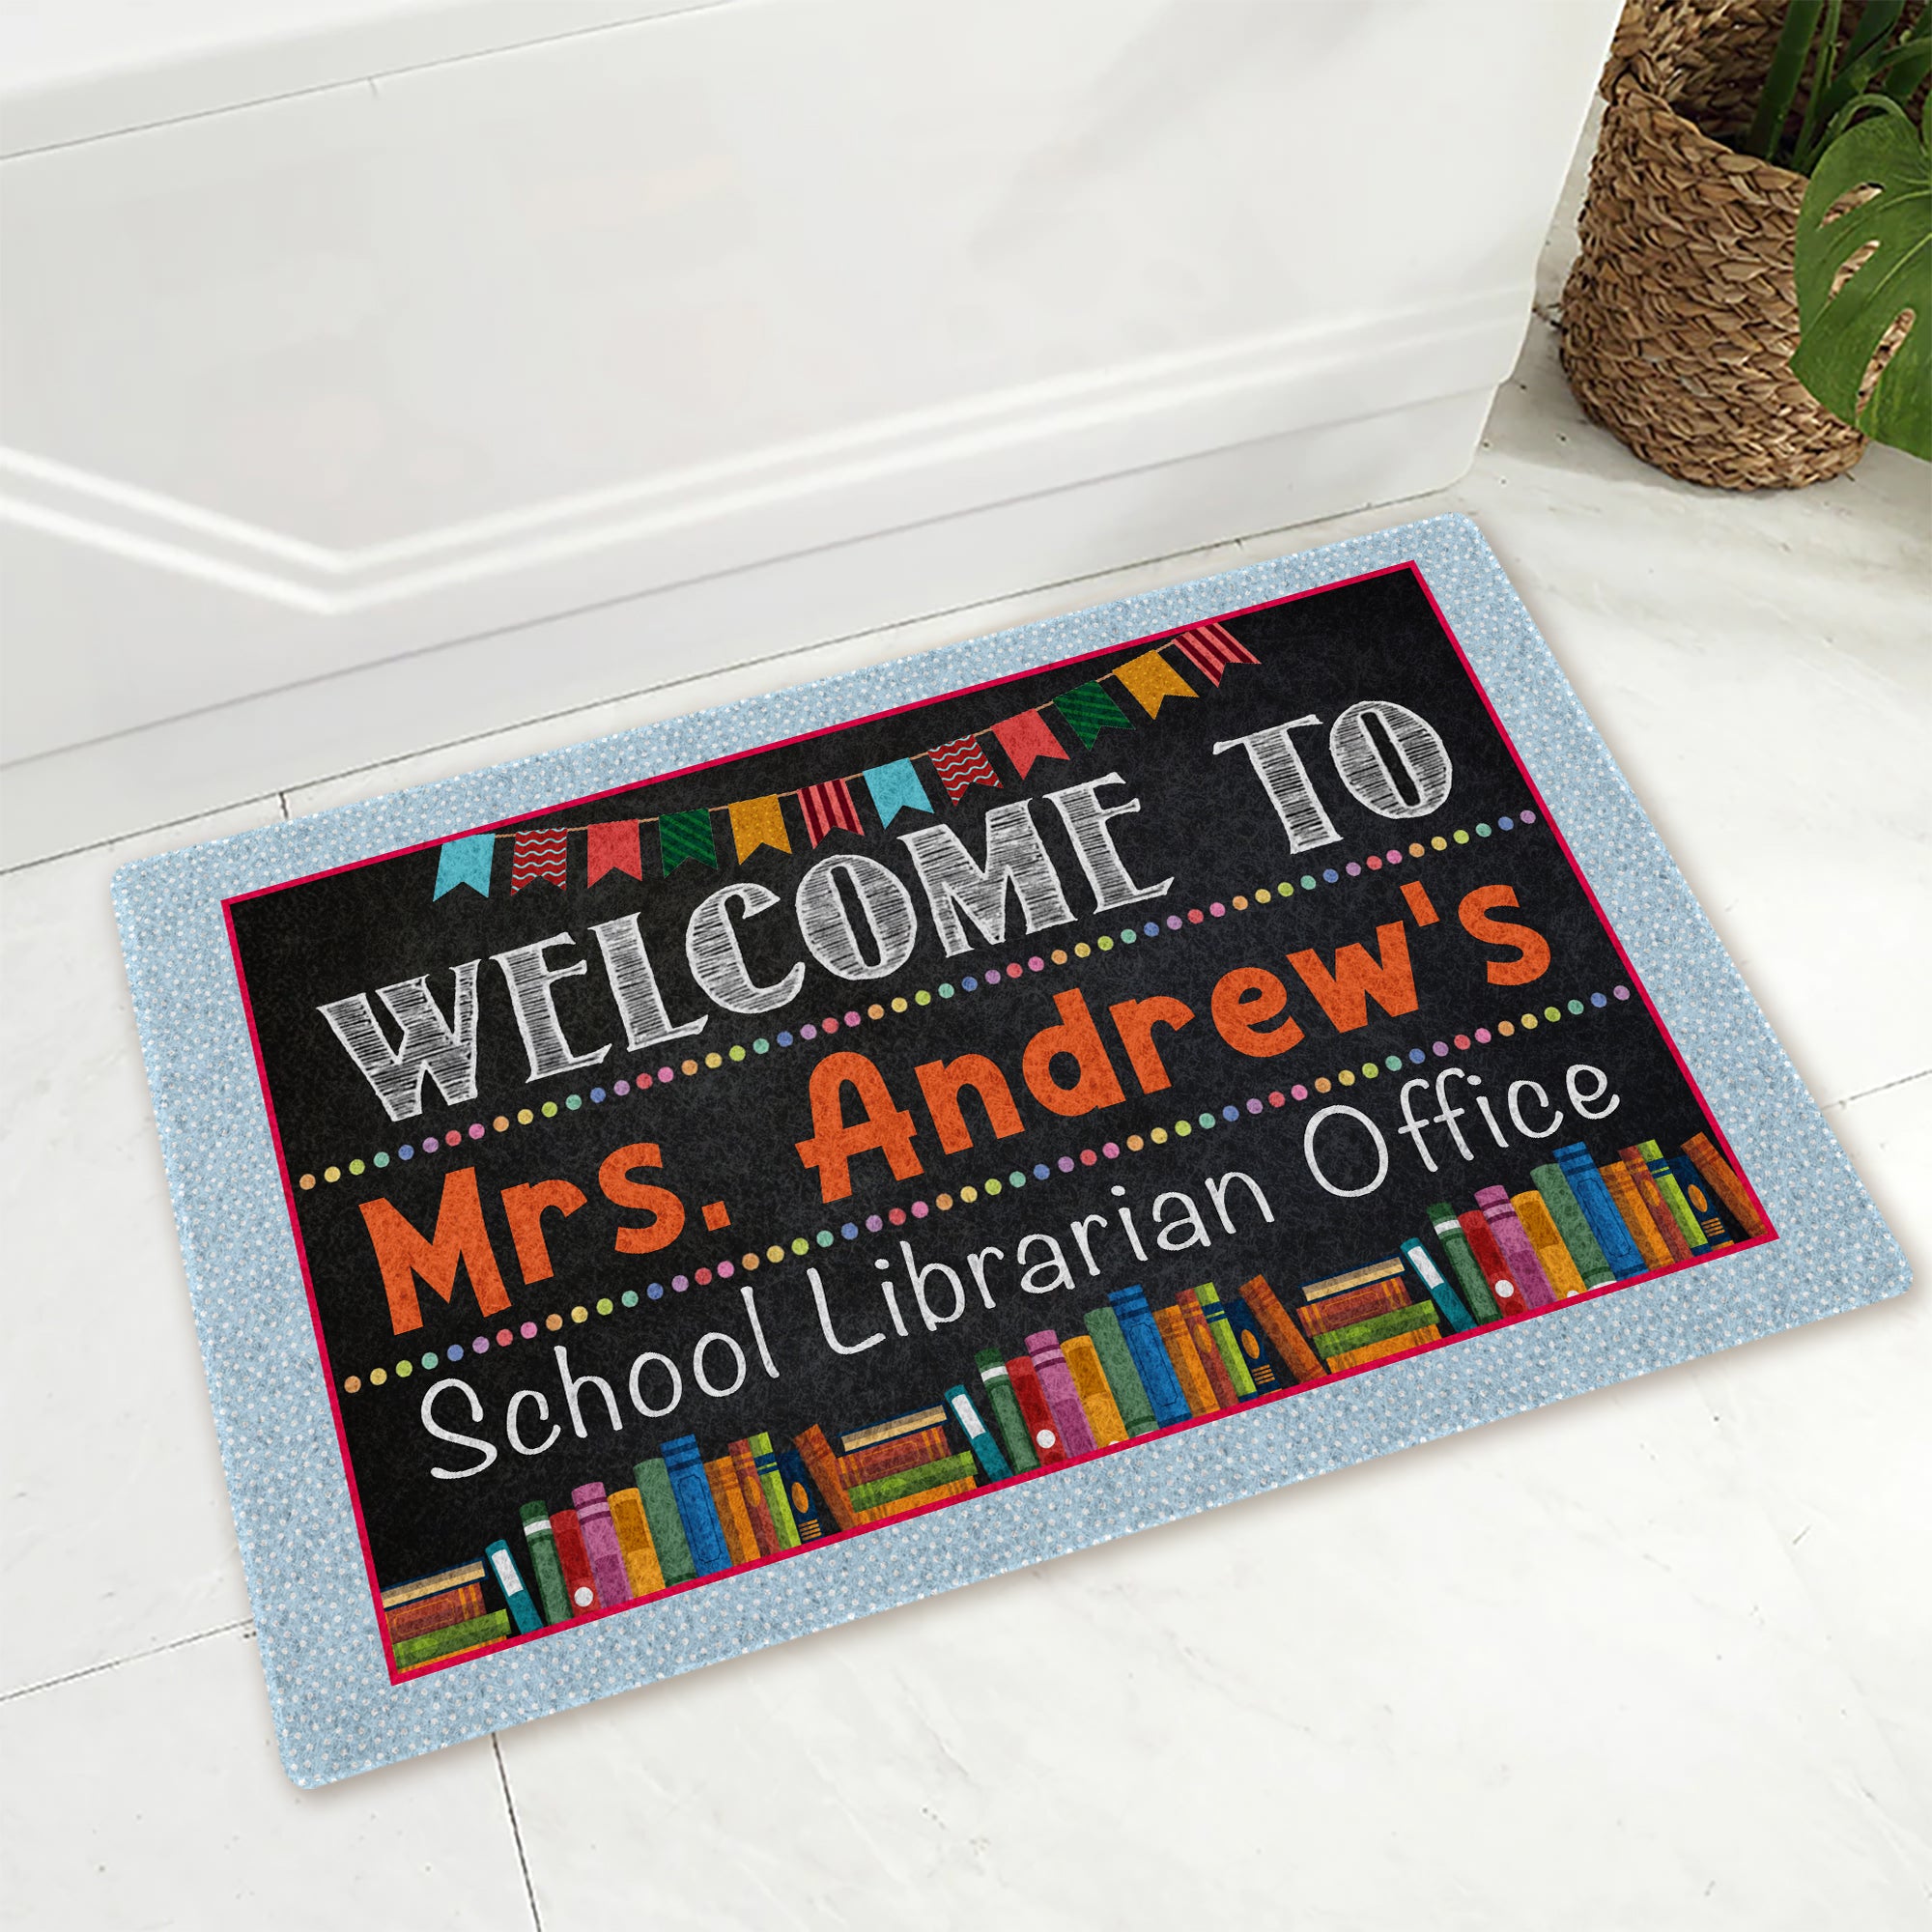 Welcome To School Librarian Office - Custom Name - Personalized Doormat